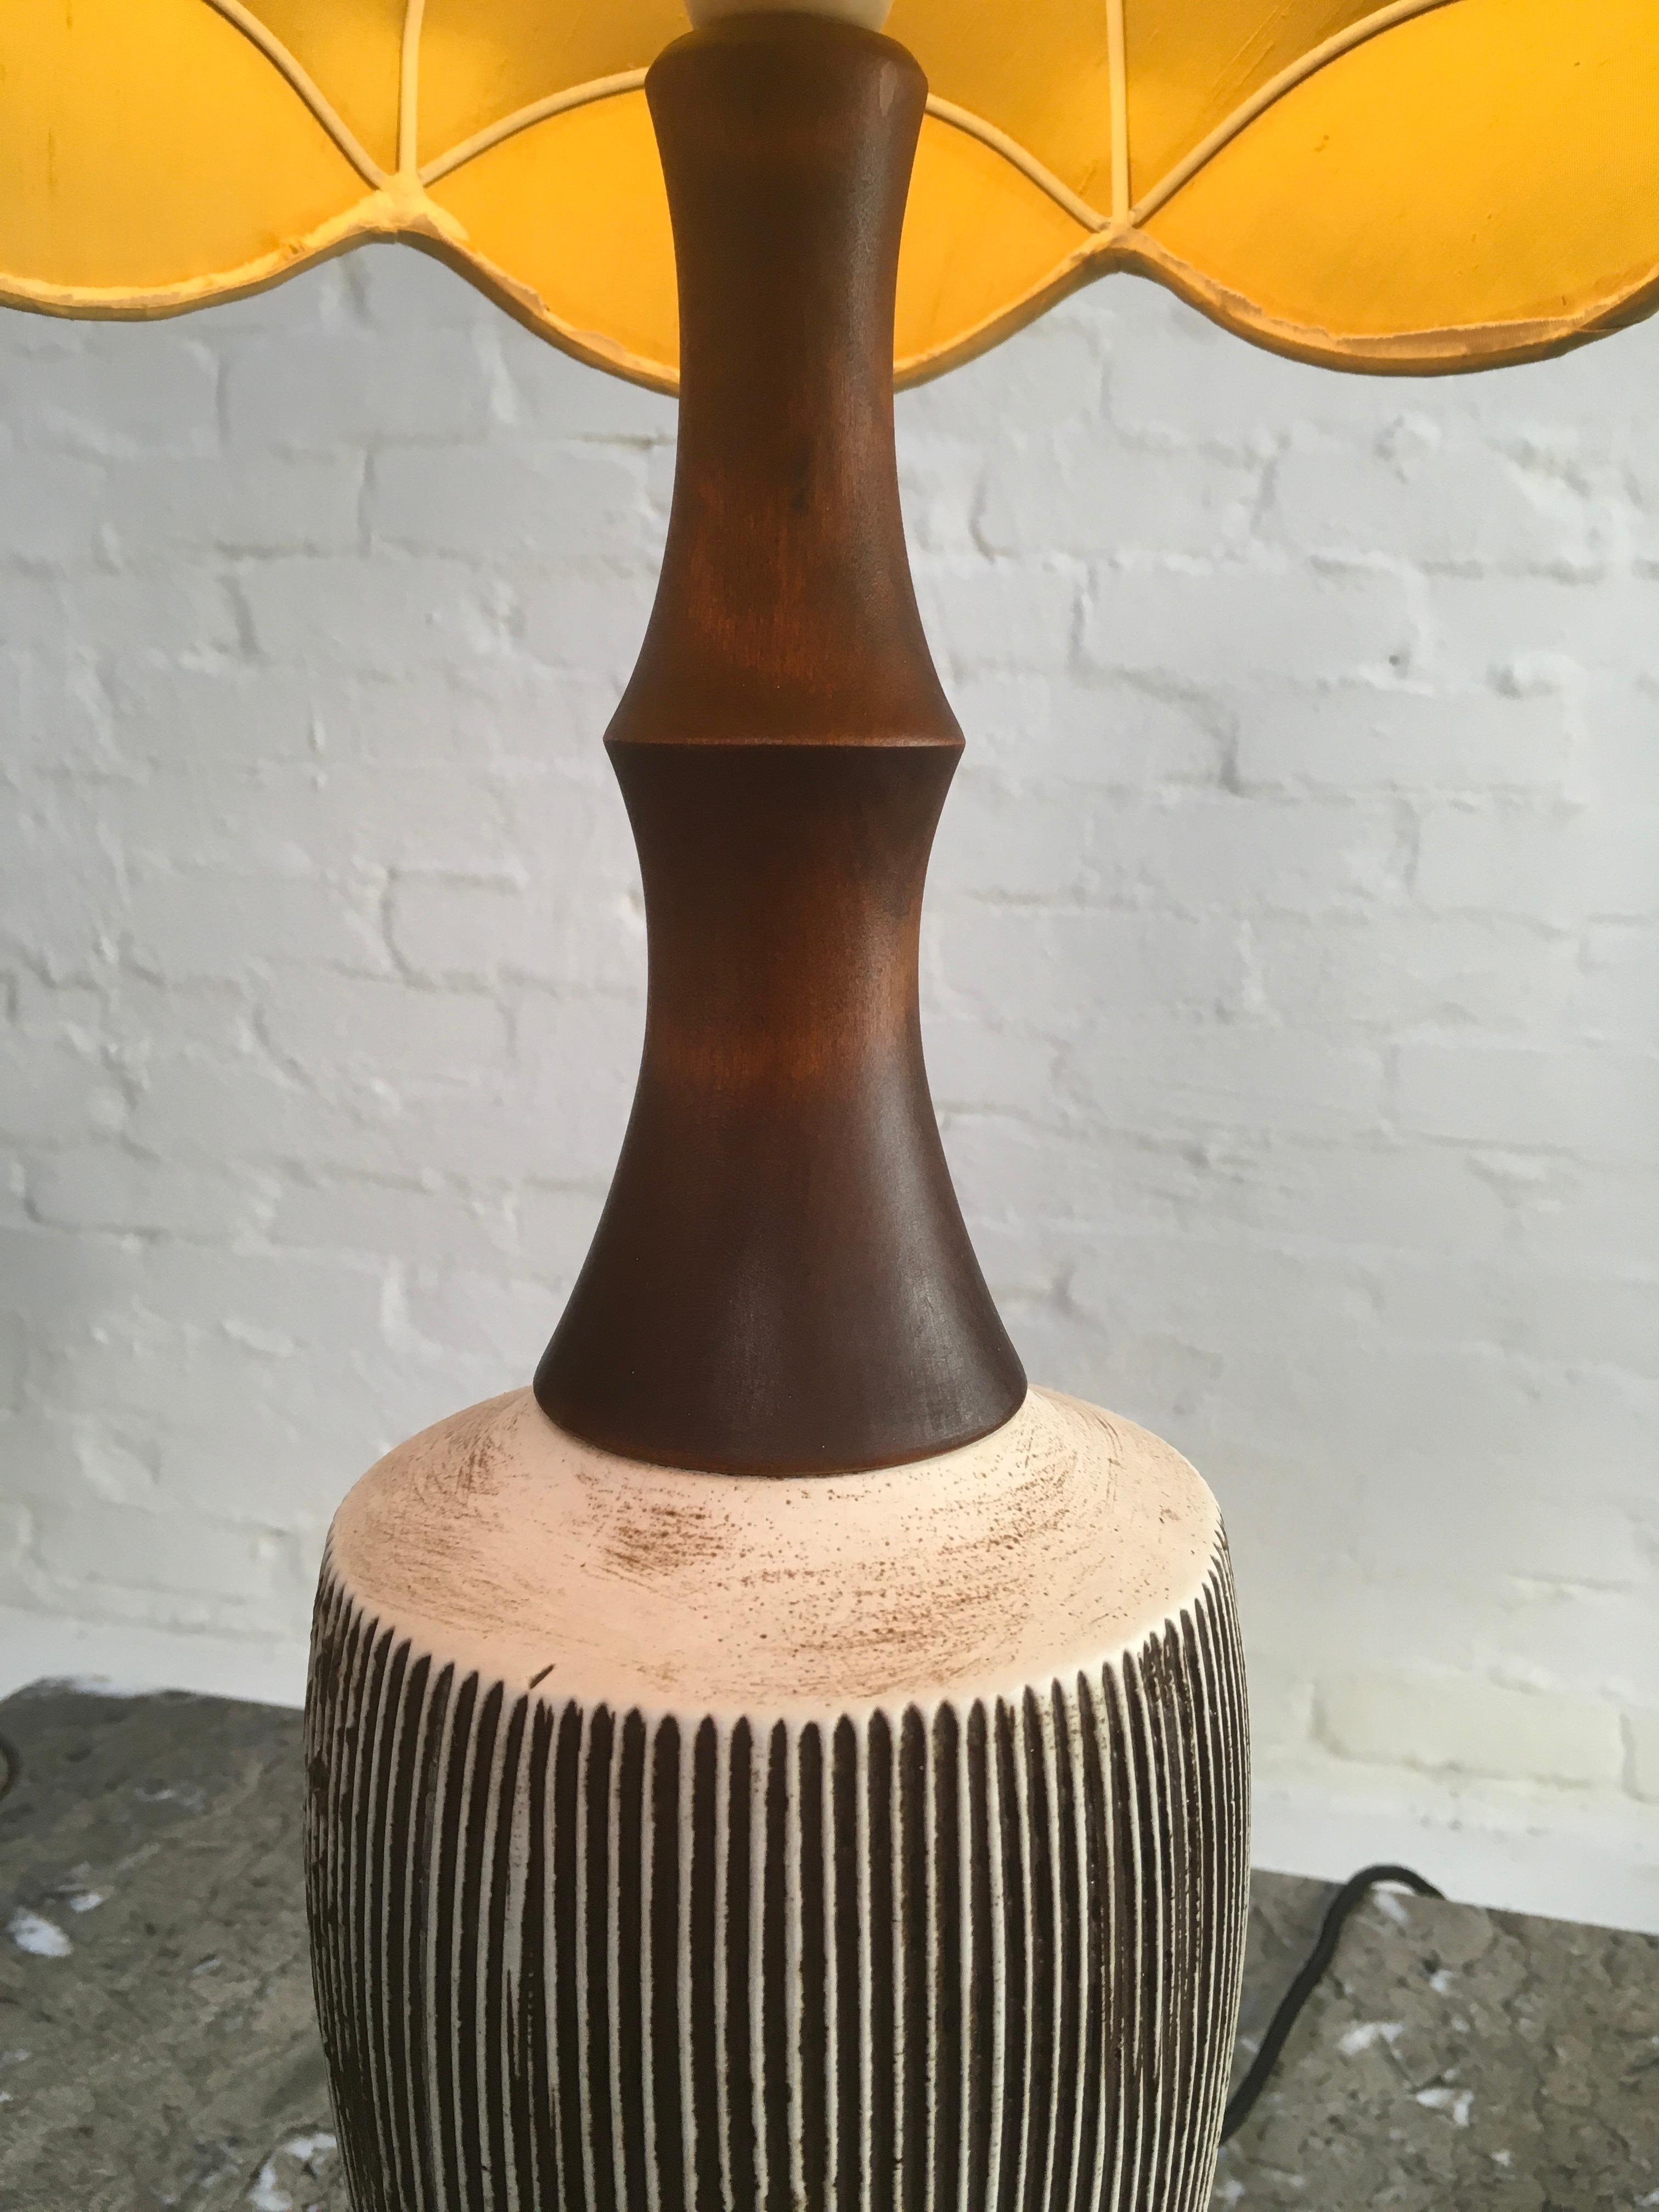 Ellis Pottery Sgraffito Ceramic and 'Walnut' Table Lamp Base Melbourne, 1950s For Sale 1